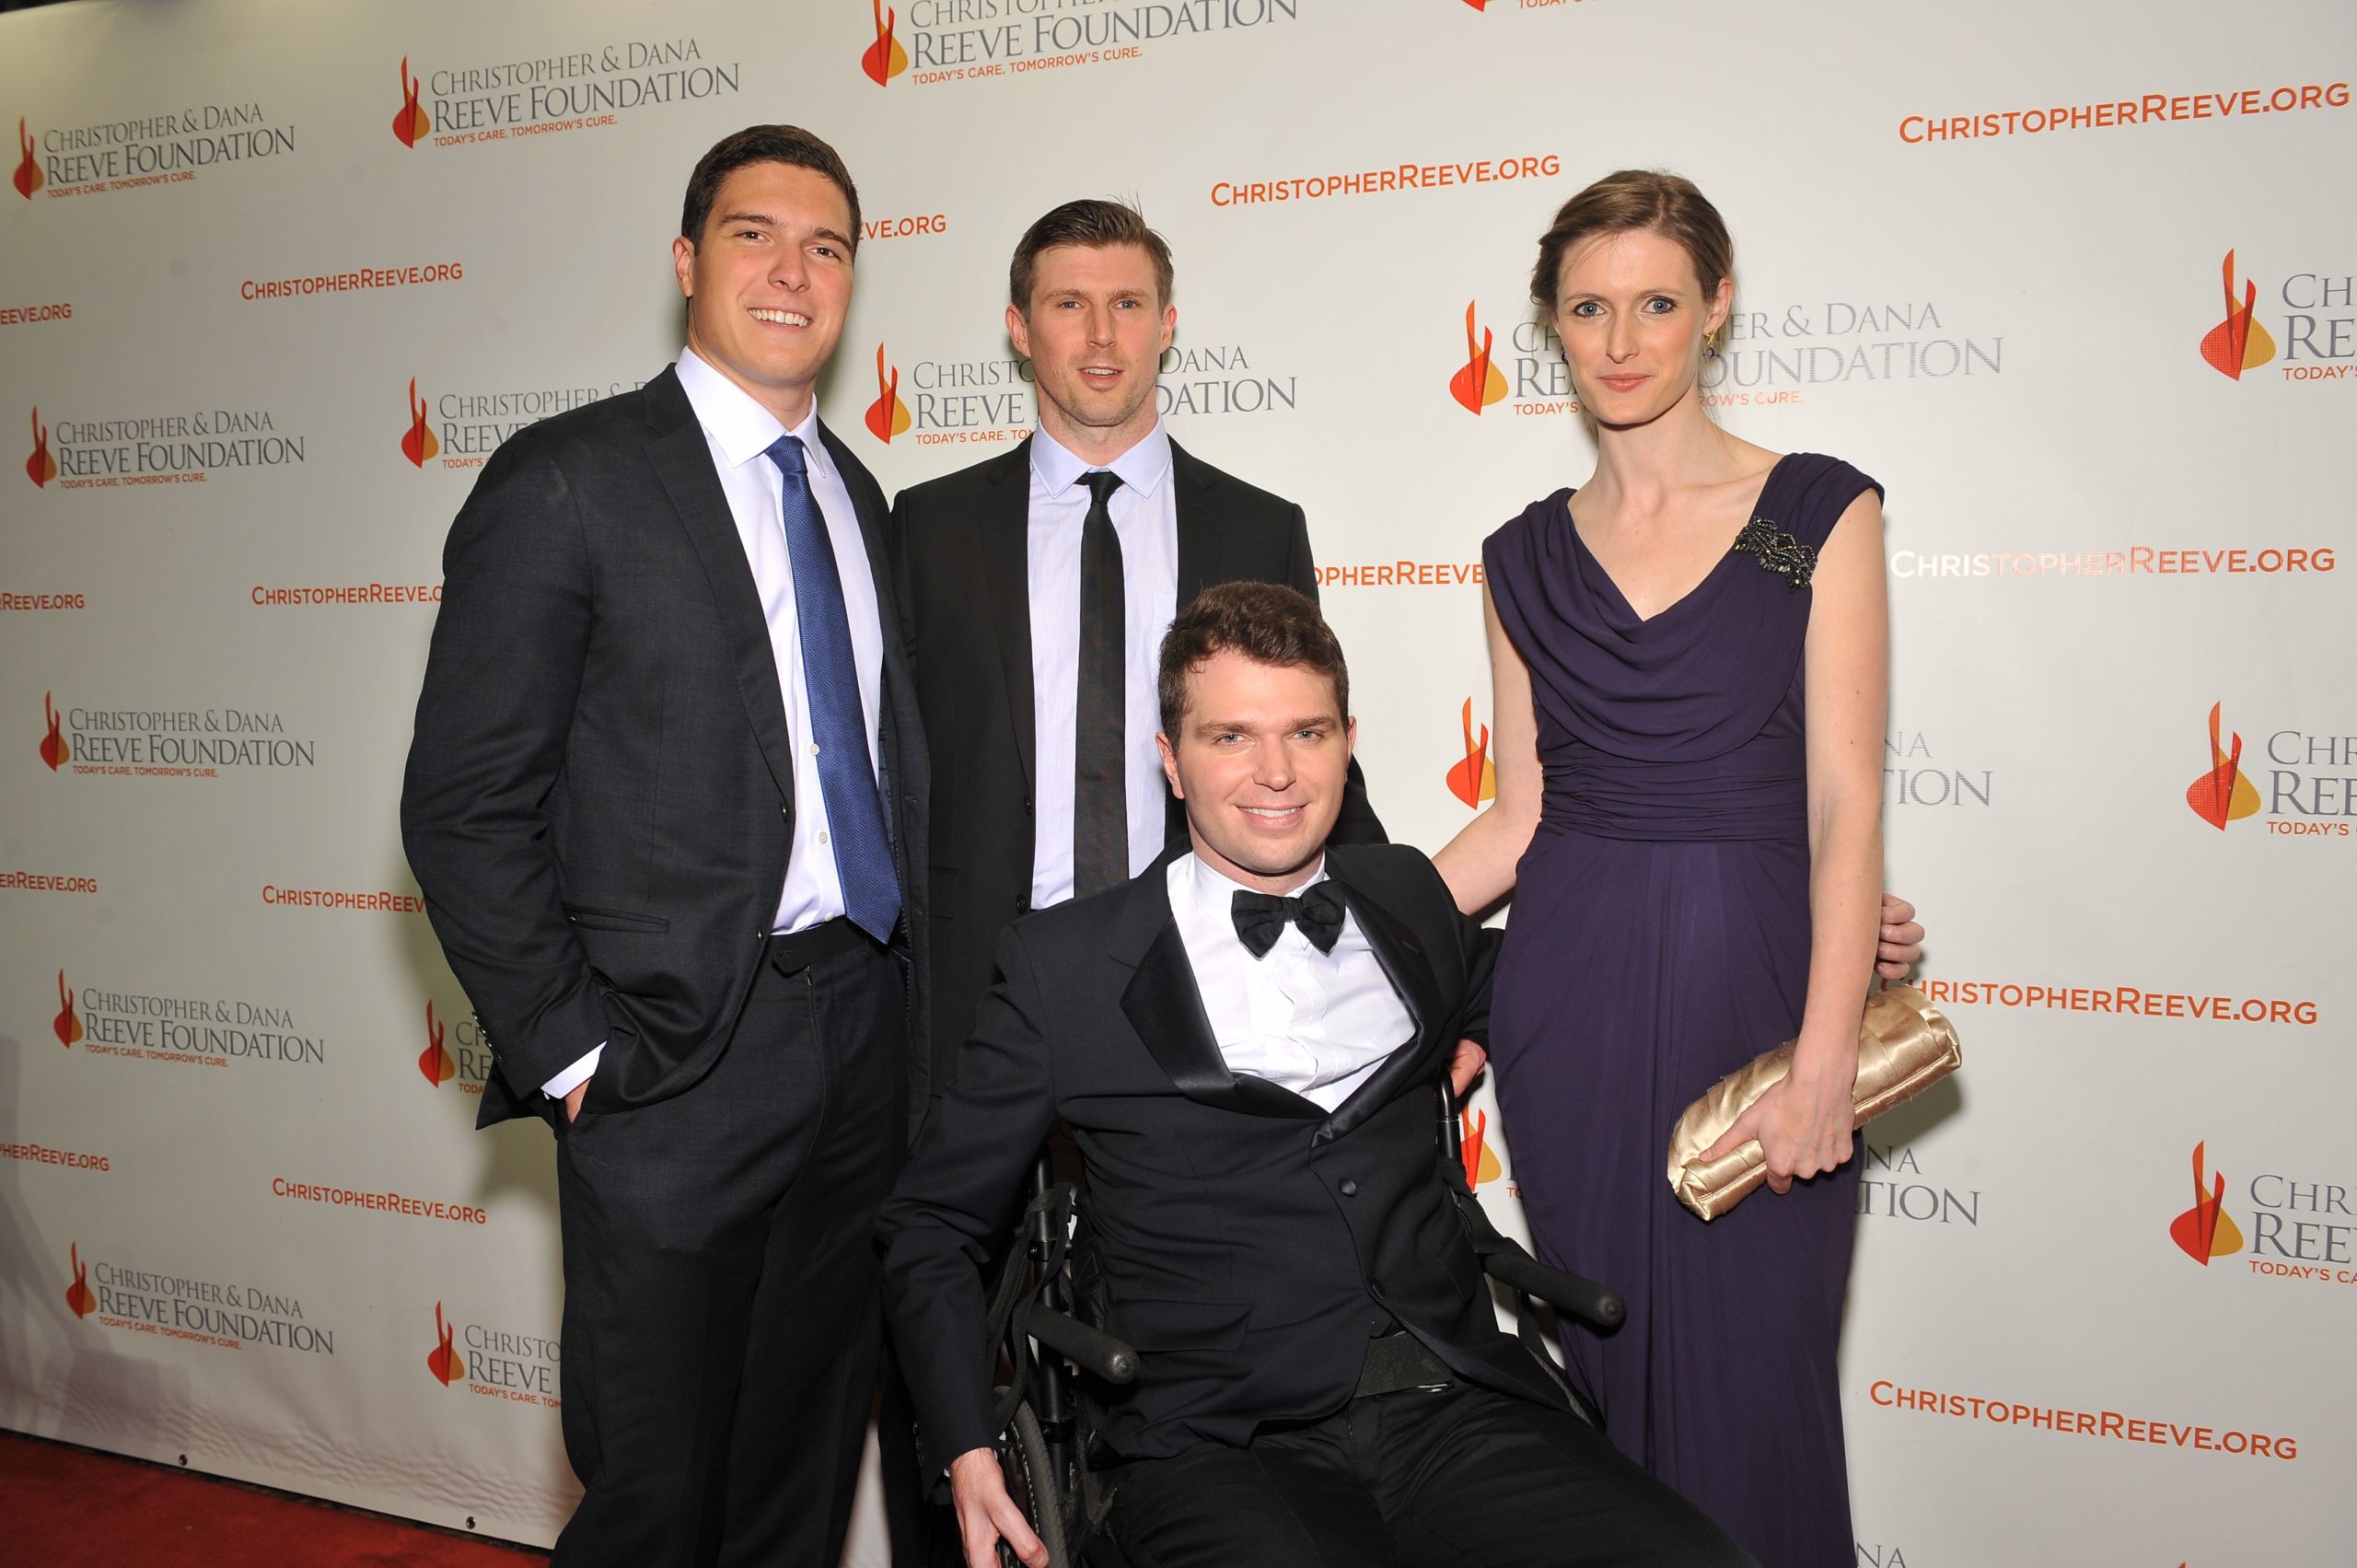 Christopher Reeve Son Matthew Reeve Is the Same Height and Physicality as His Late Father!